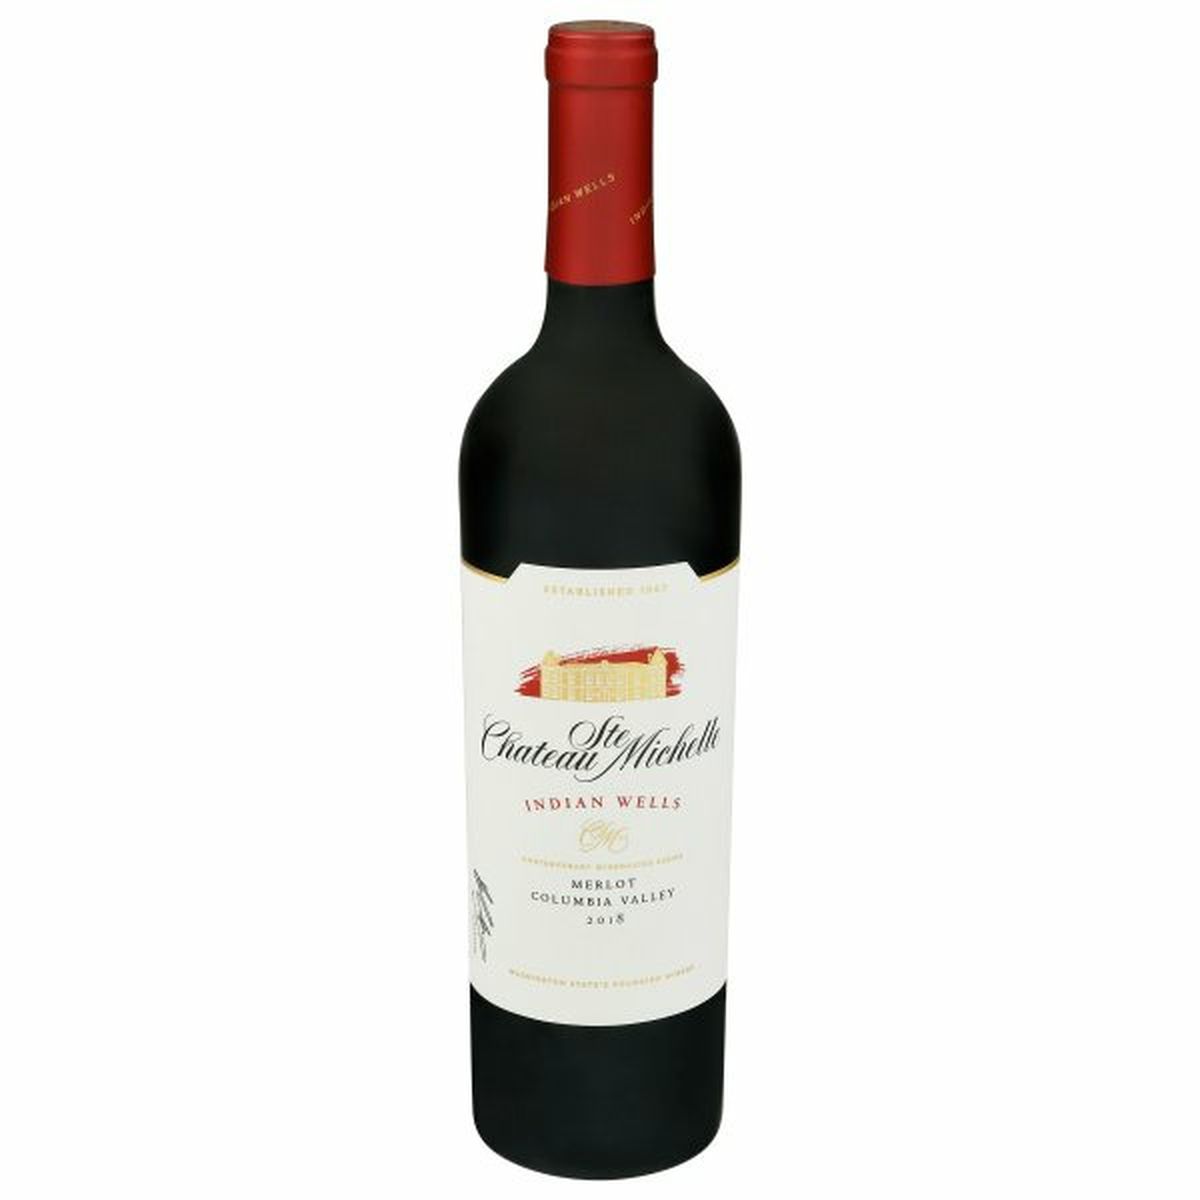 Calories in Chateau Ste Michelle Indian Wells Merlot